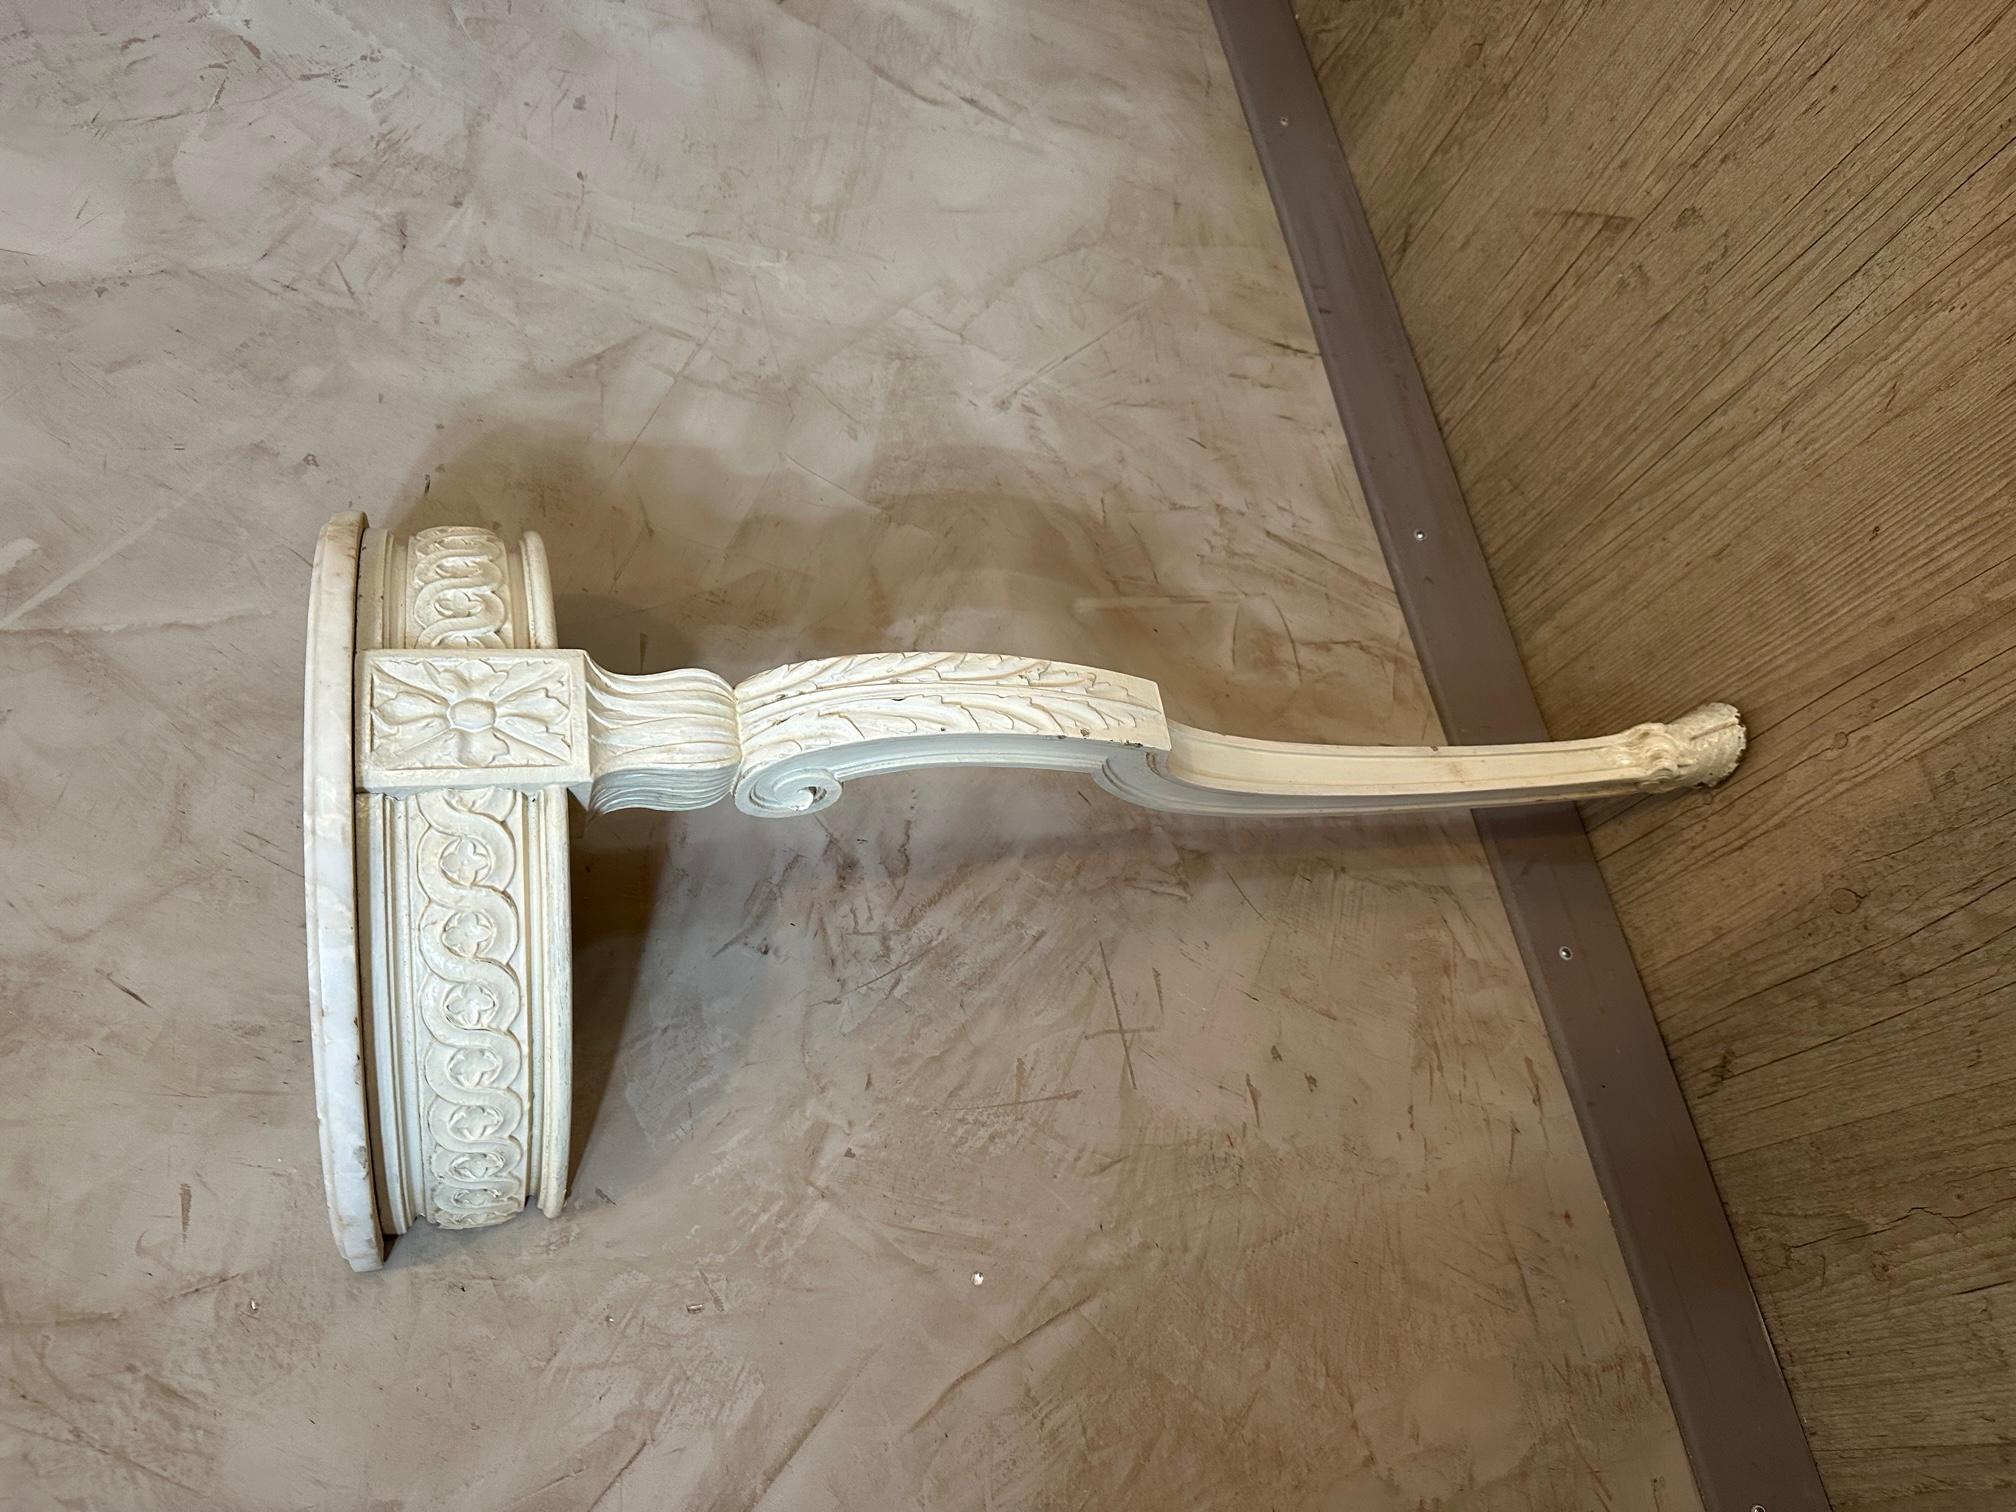 Louis XVI style wall shelf dating from the 19th century with removable white marble.
Fully pegged. Crowbar. footdoe representing. 
Very nice quality. Pretty off-white patina.
Ideal for highlighting an object.